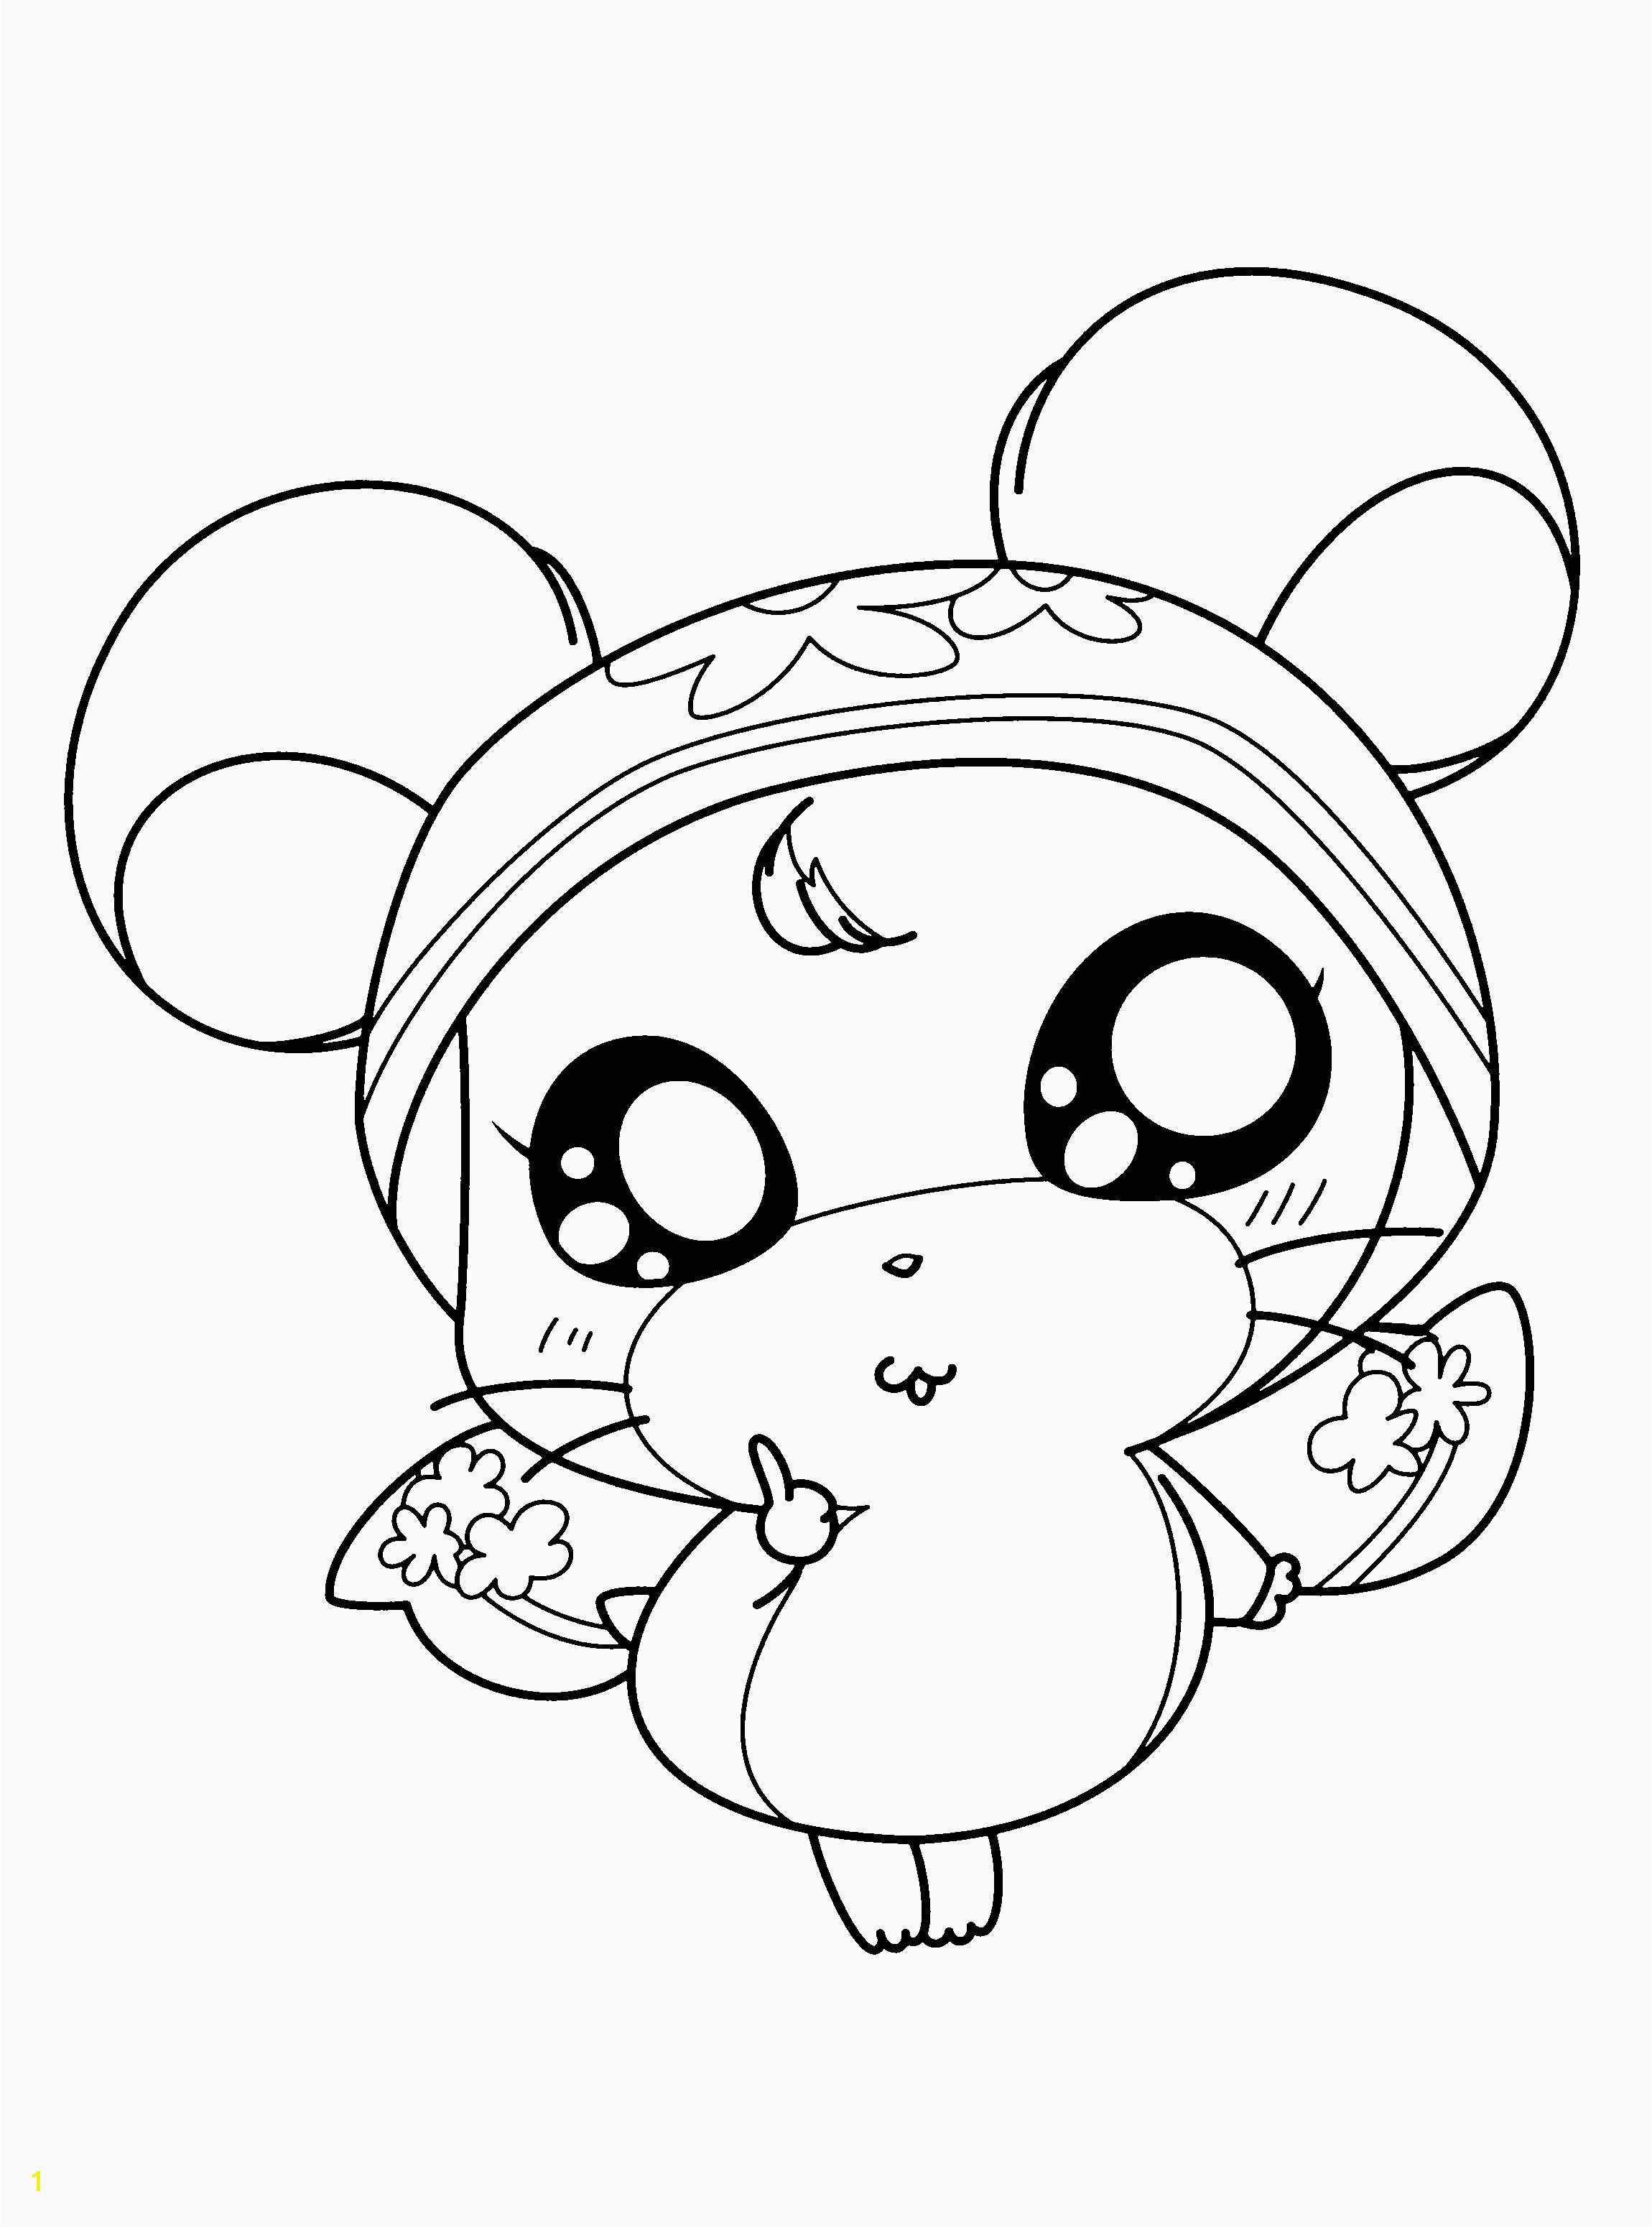 Cute Cartoon Puppy Coloring Pages Puppy Coloring Pages Coloring Pages